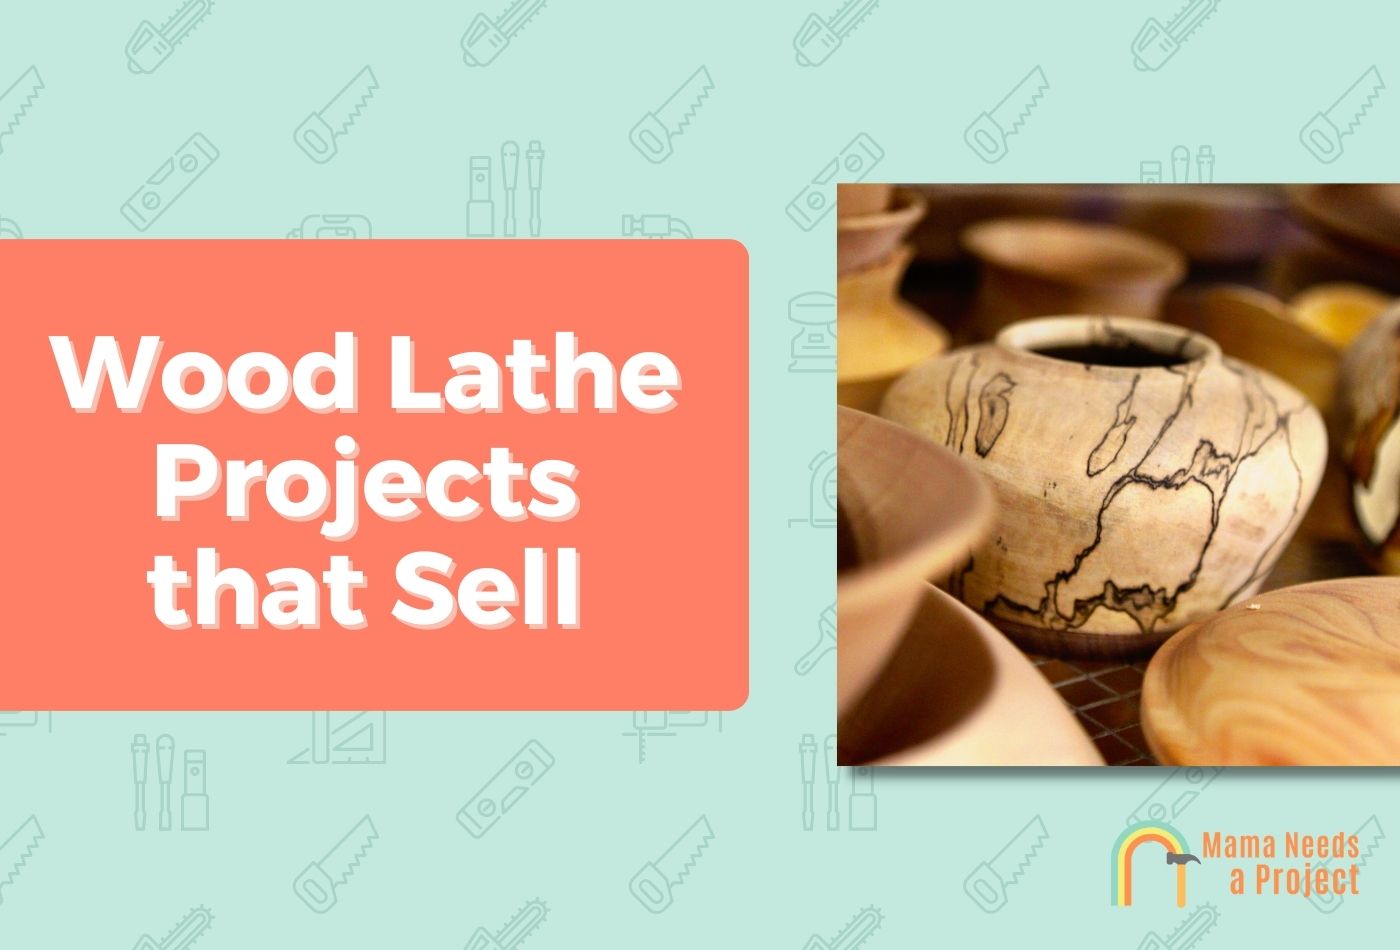 Wood Lathe Projects that Sell